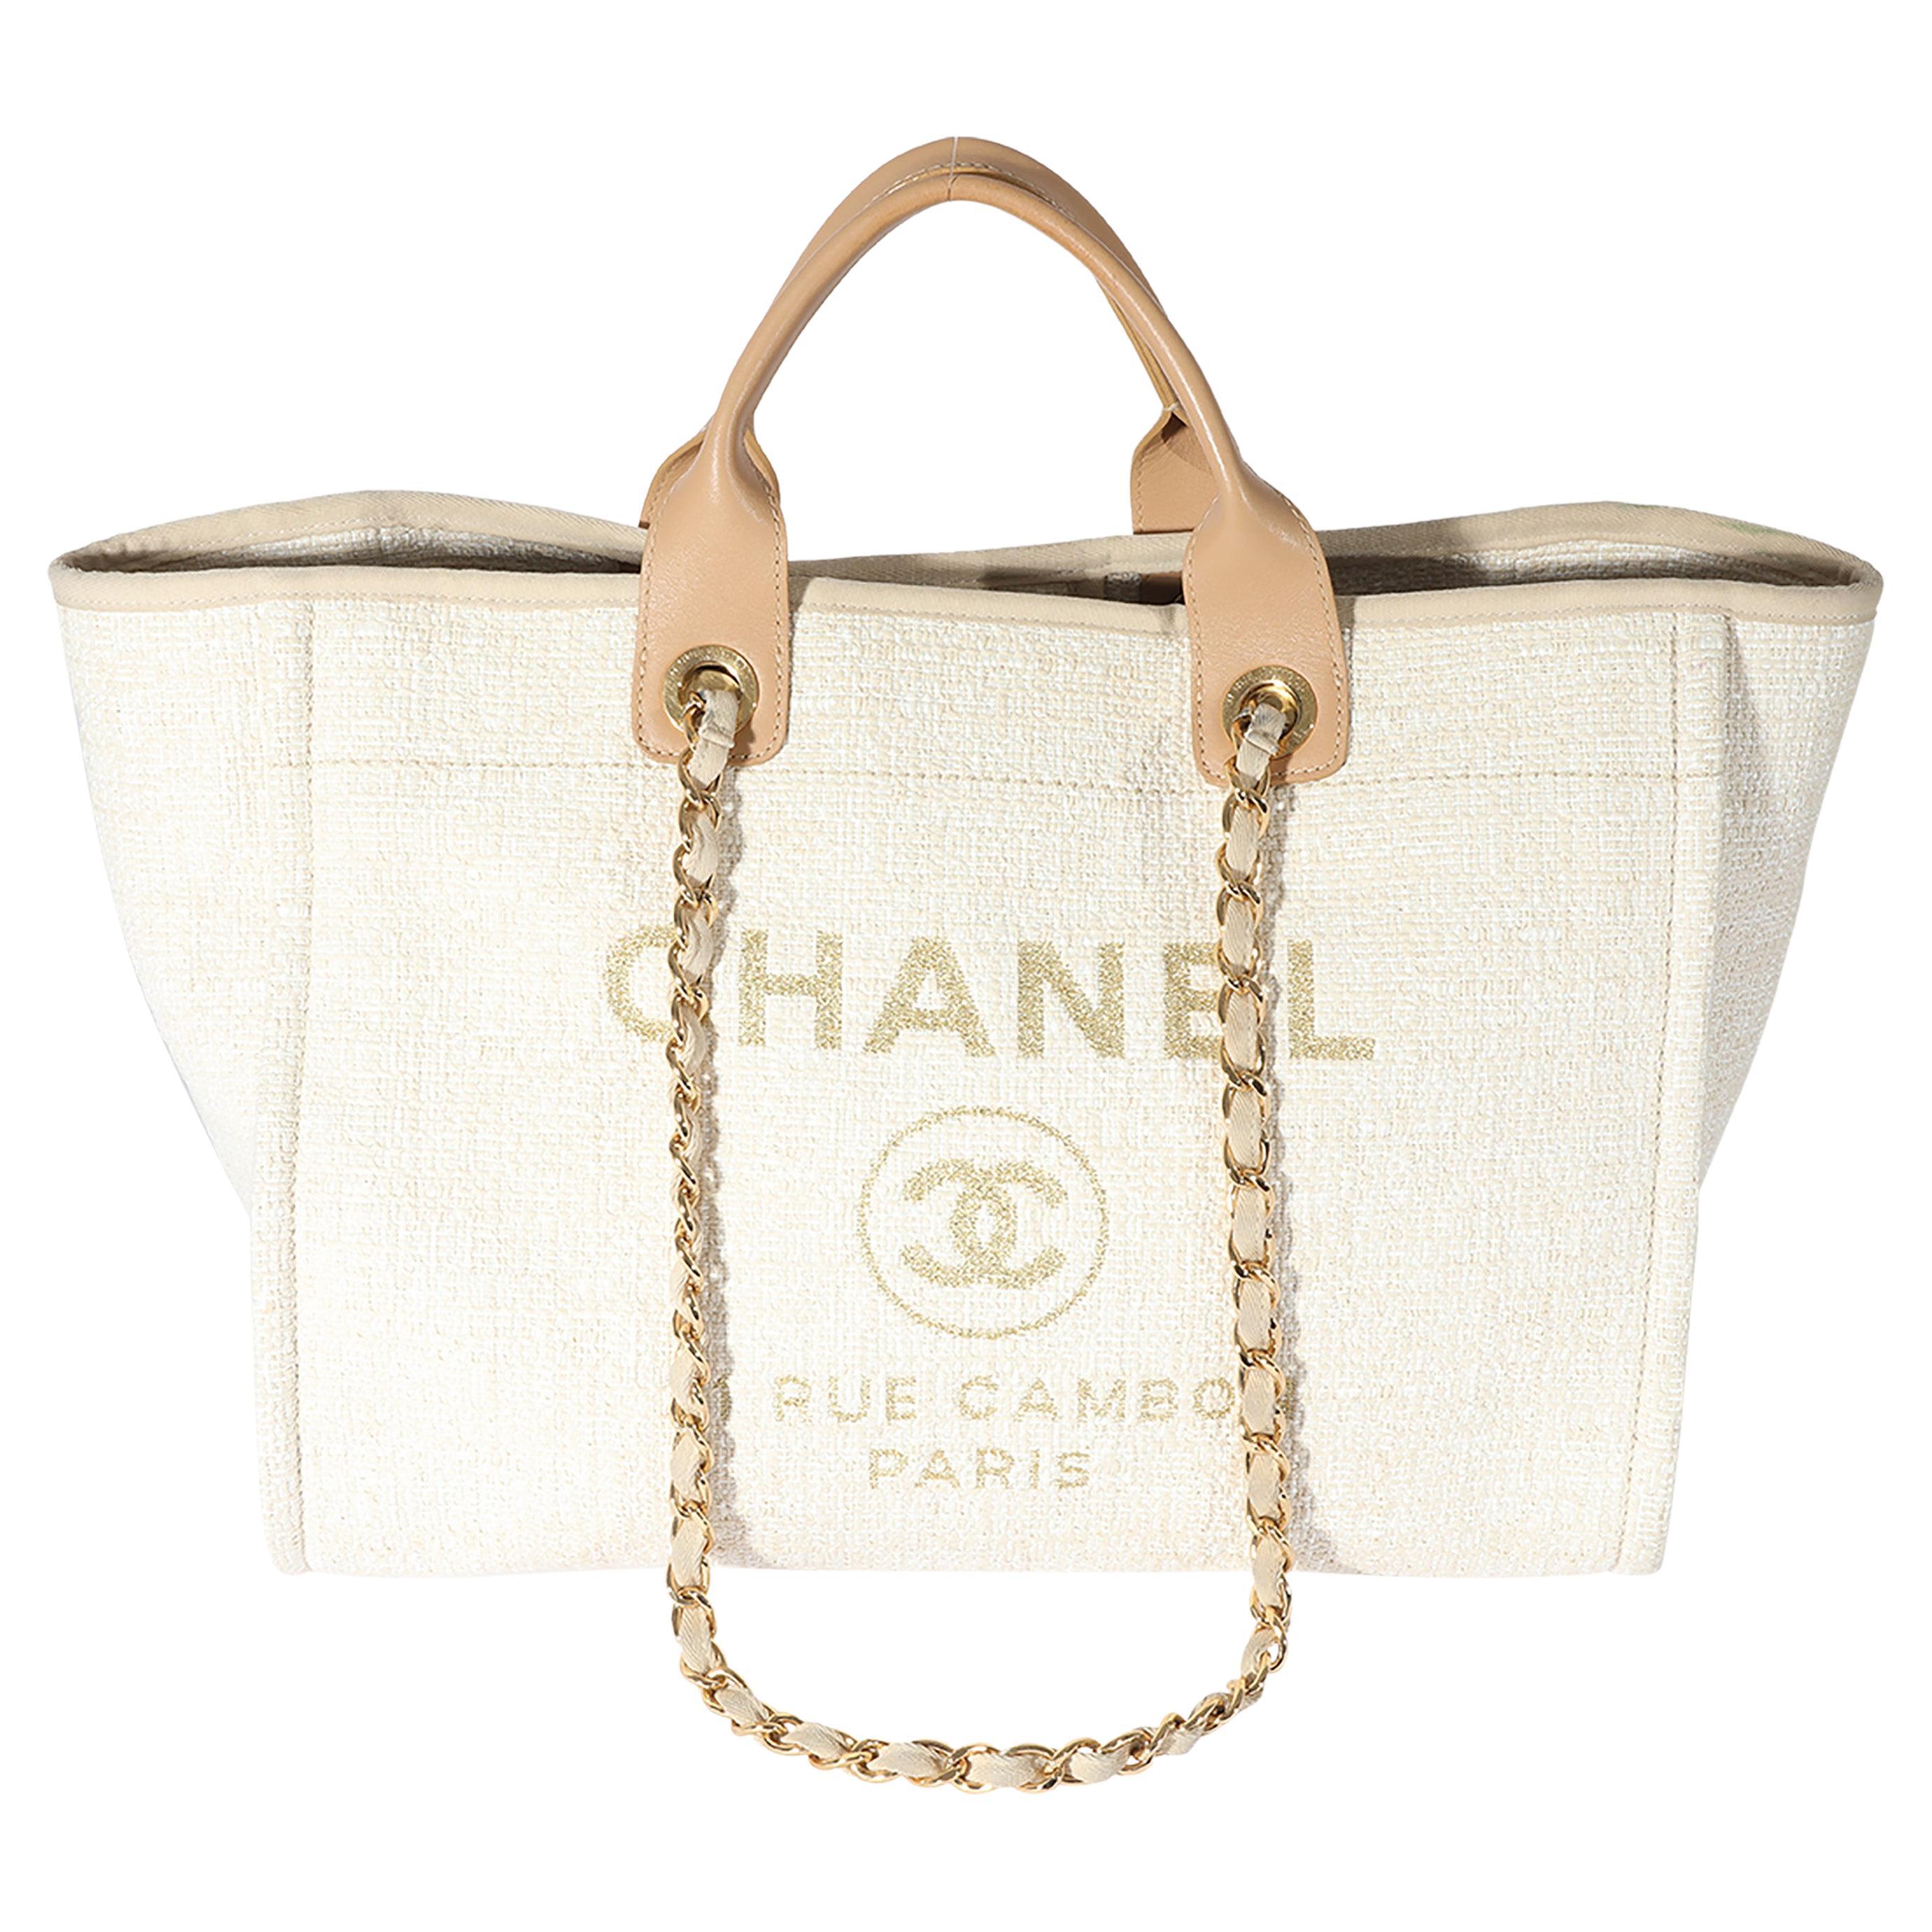 Chanel Canvas Totes - 124 For Sale on 1stDibs | chanel canvas bag, chanel  deauville tote, chanel canvas tote bag